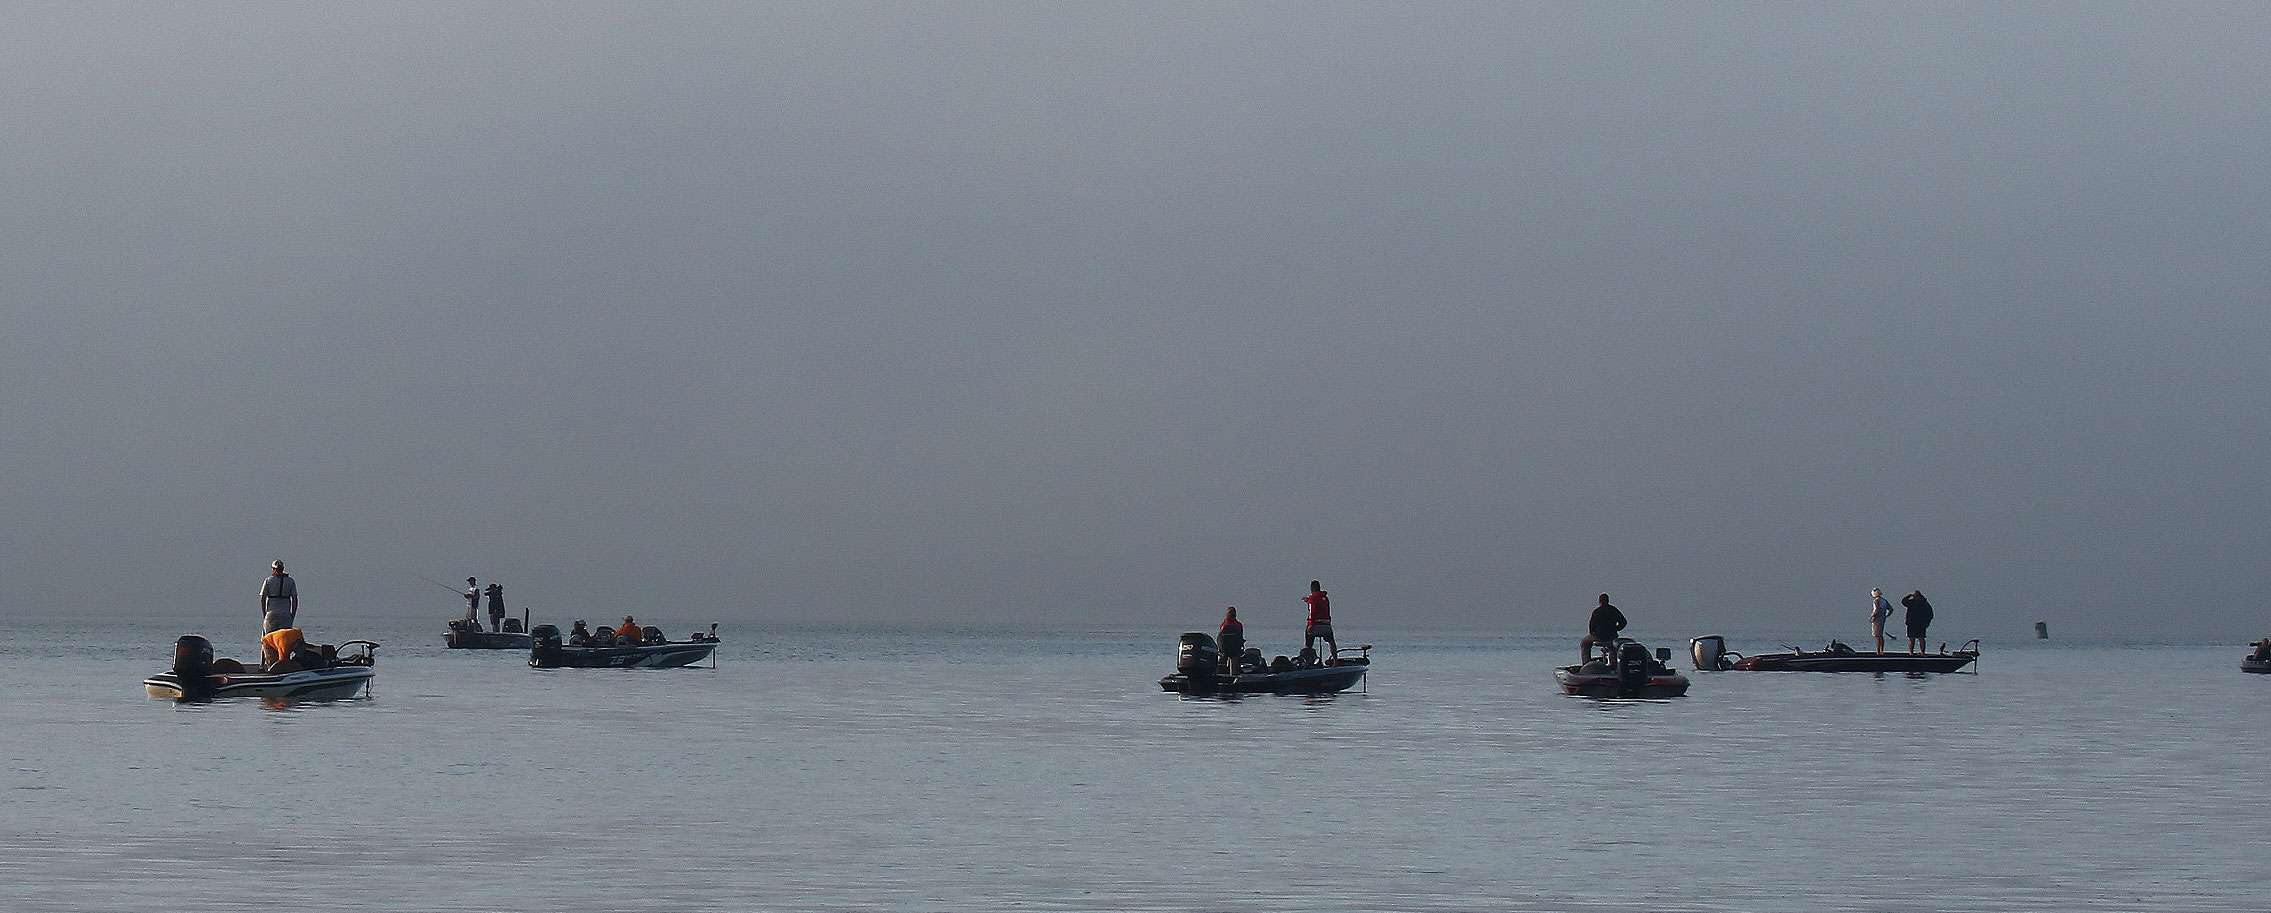 Edwin Evers started Day 4 of the Zippo BASSfest at Kentucky Lake presented by A.R.E. Truck Caps midway up the lake surrounded by two fog banks.